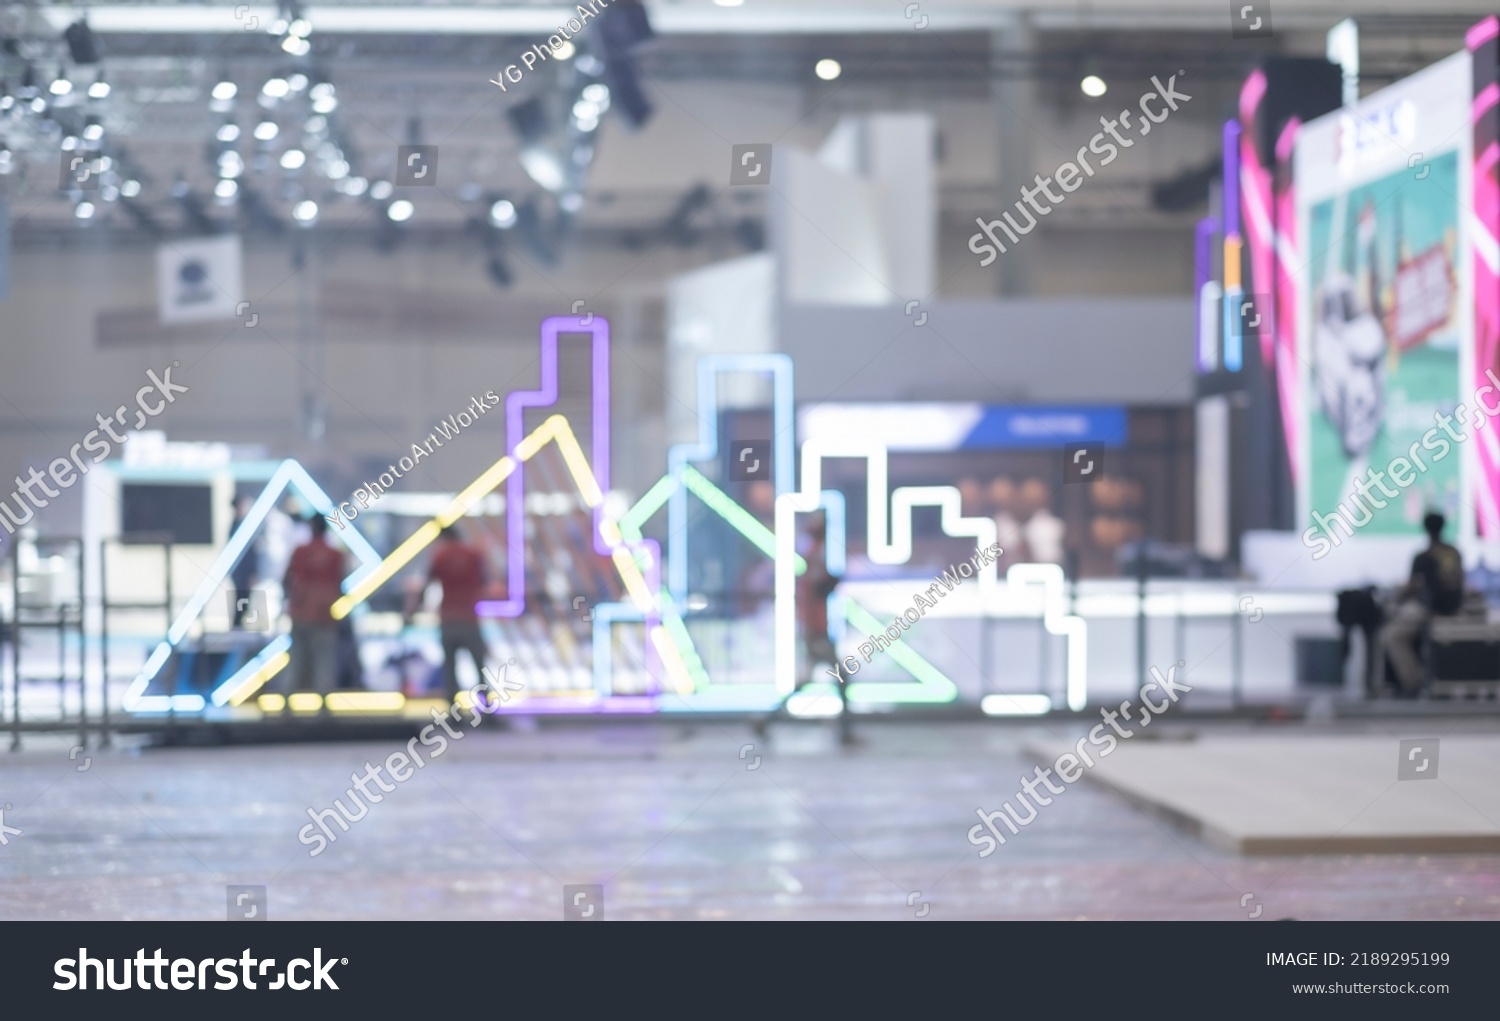 Blurry workers preparing exhibition event hall. Bokeh background of trade show business, world or international expo showcase, tech fair, with exhibitor trade show booth displaying product. #2189295199